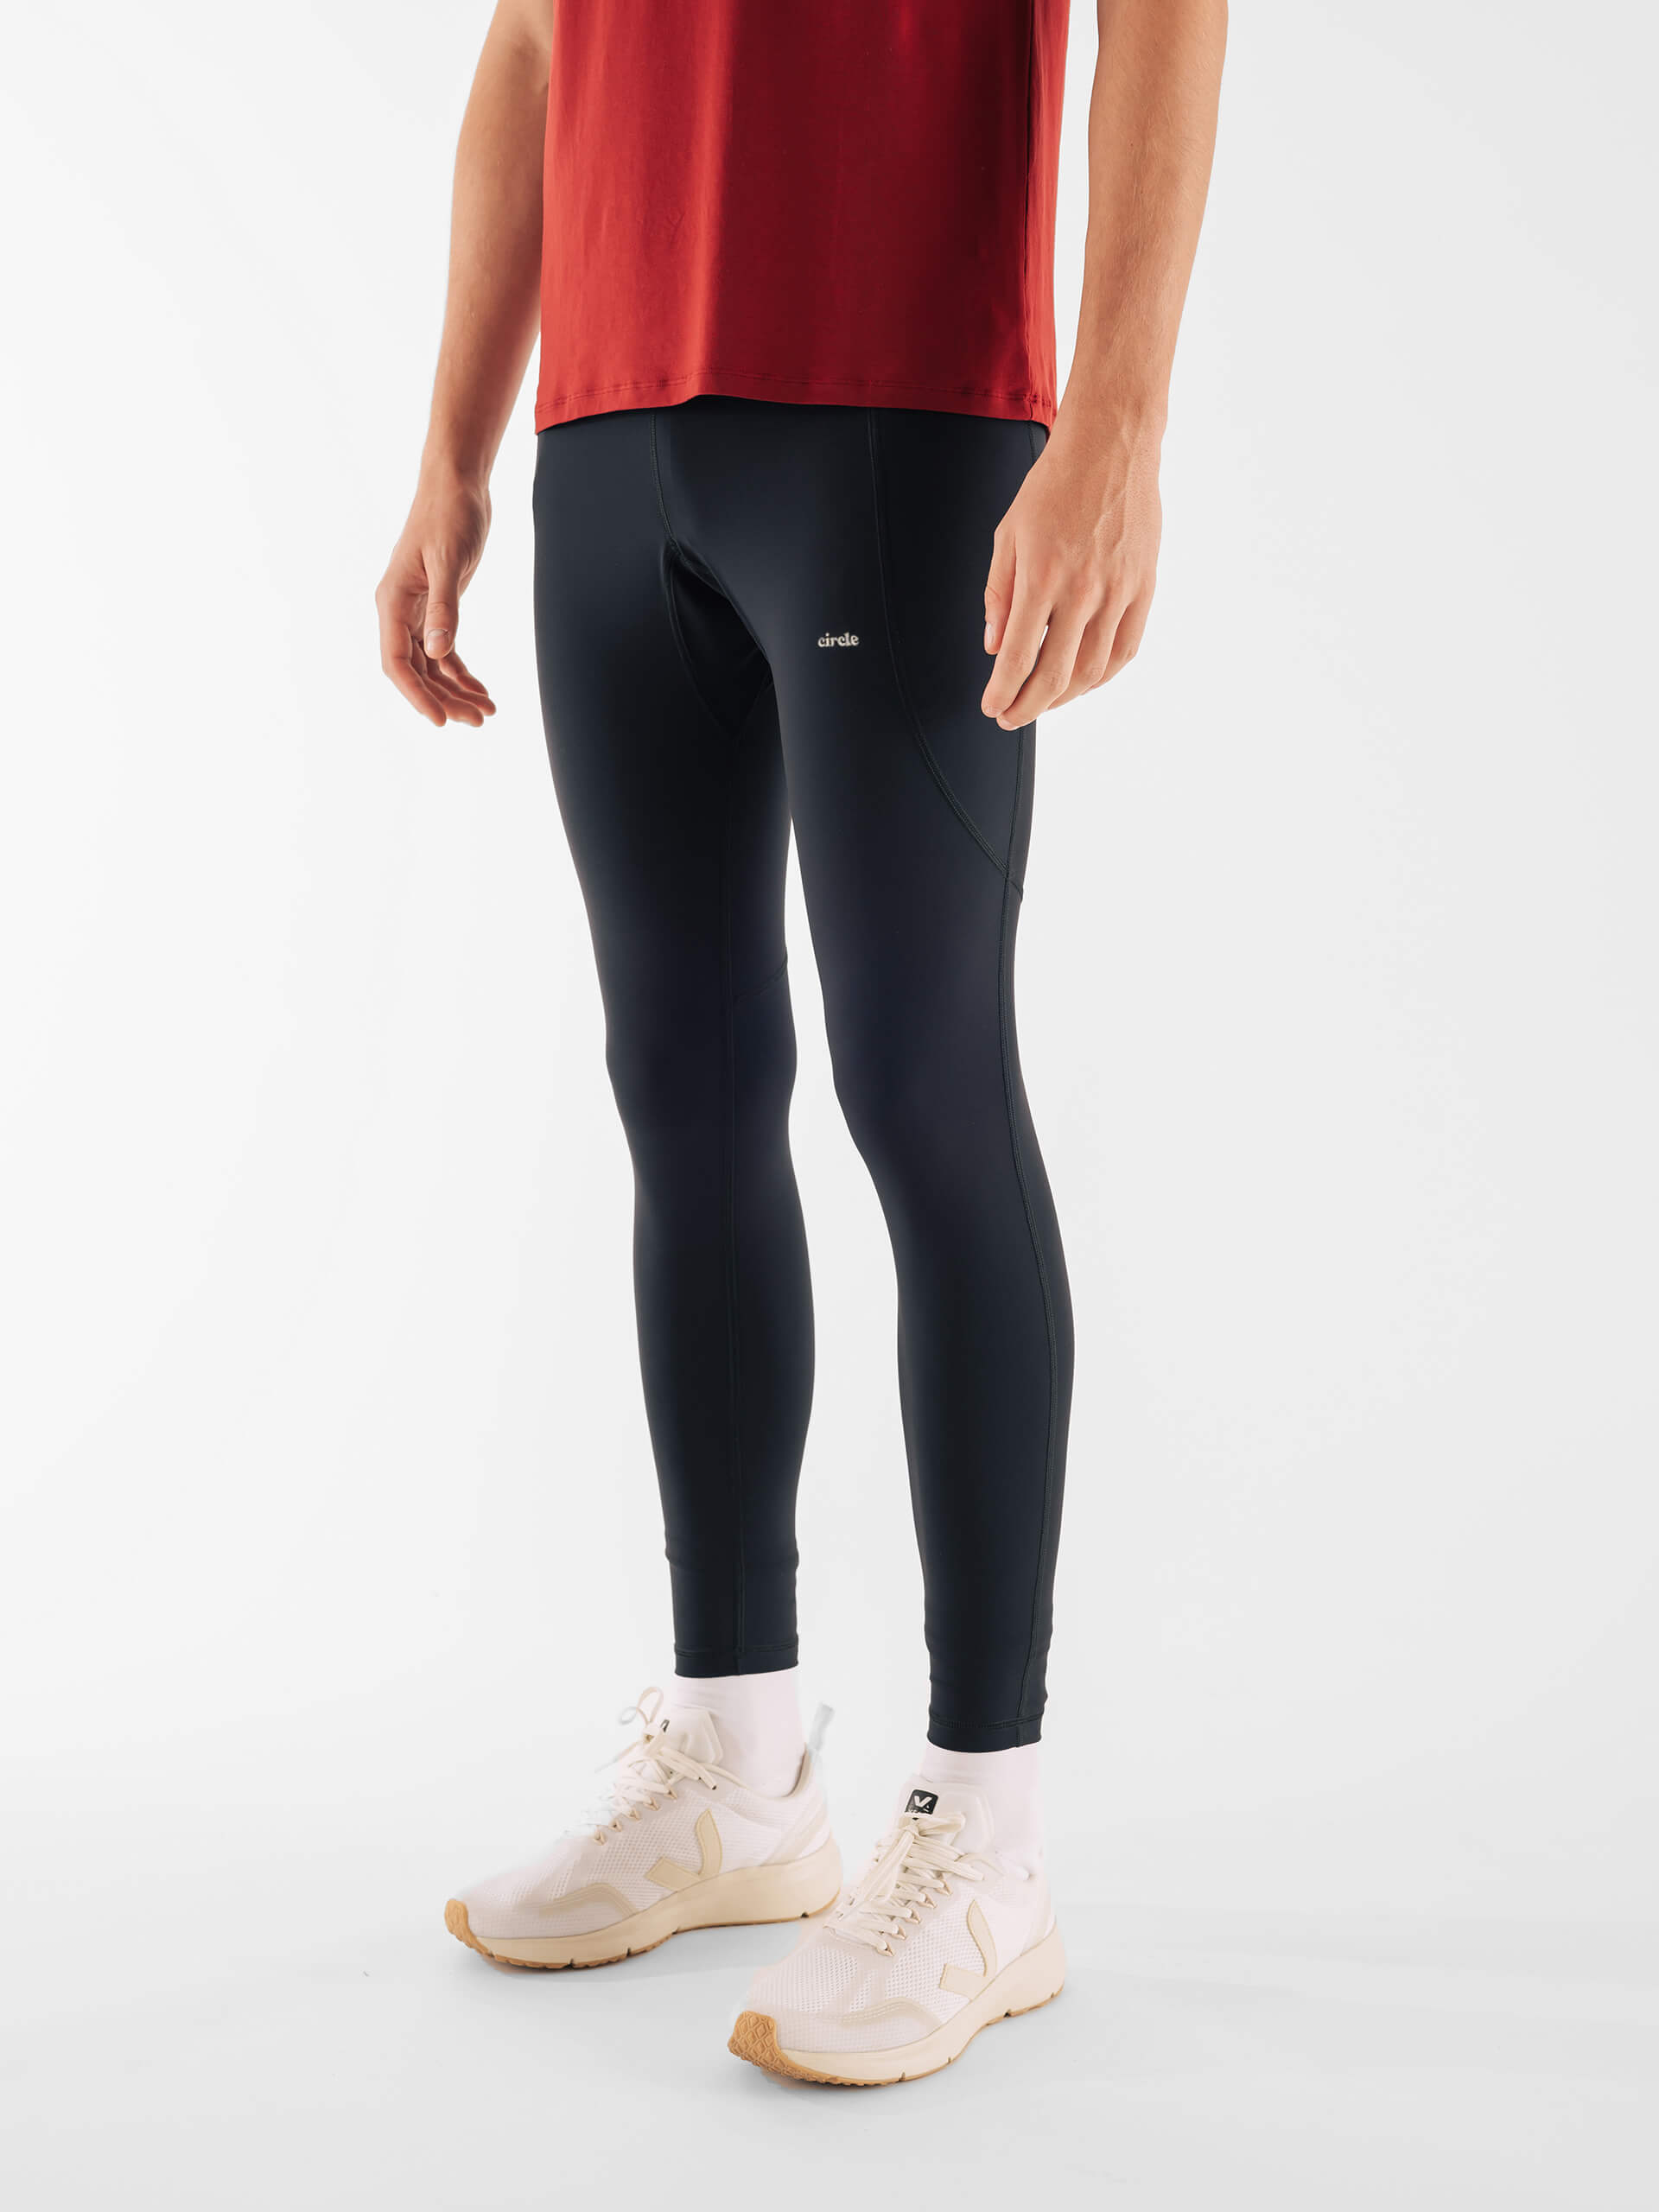 Compression Running Leggings For Men Sexy And Comfortable Sport Yoga Pants  For Men For Workouts And Leisure Activities X0824 From Fashion_official01,  $13.85 | DHgate.Com